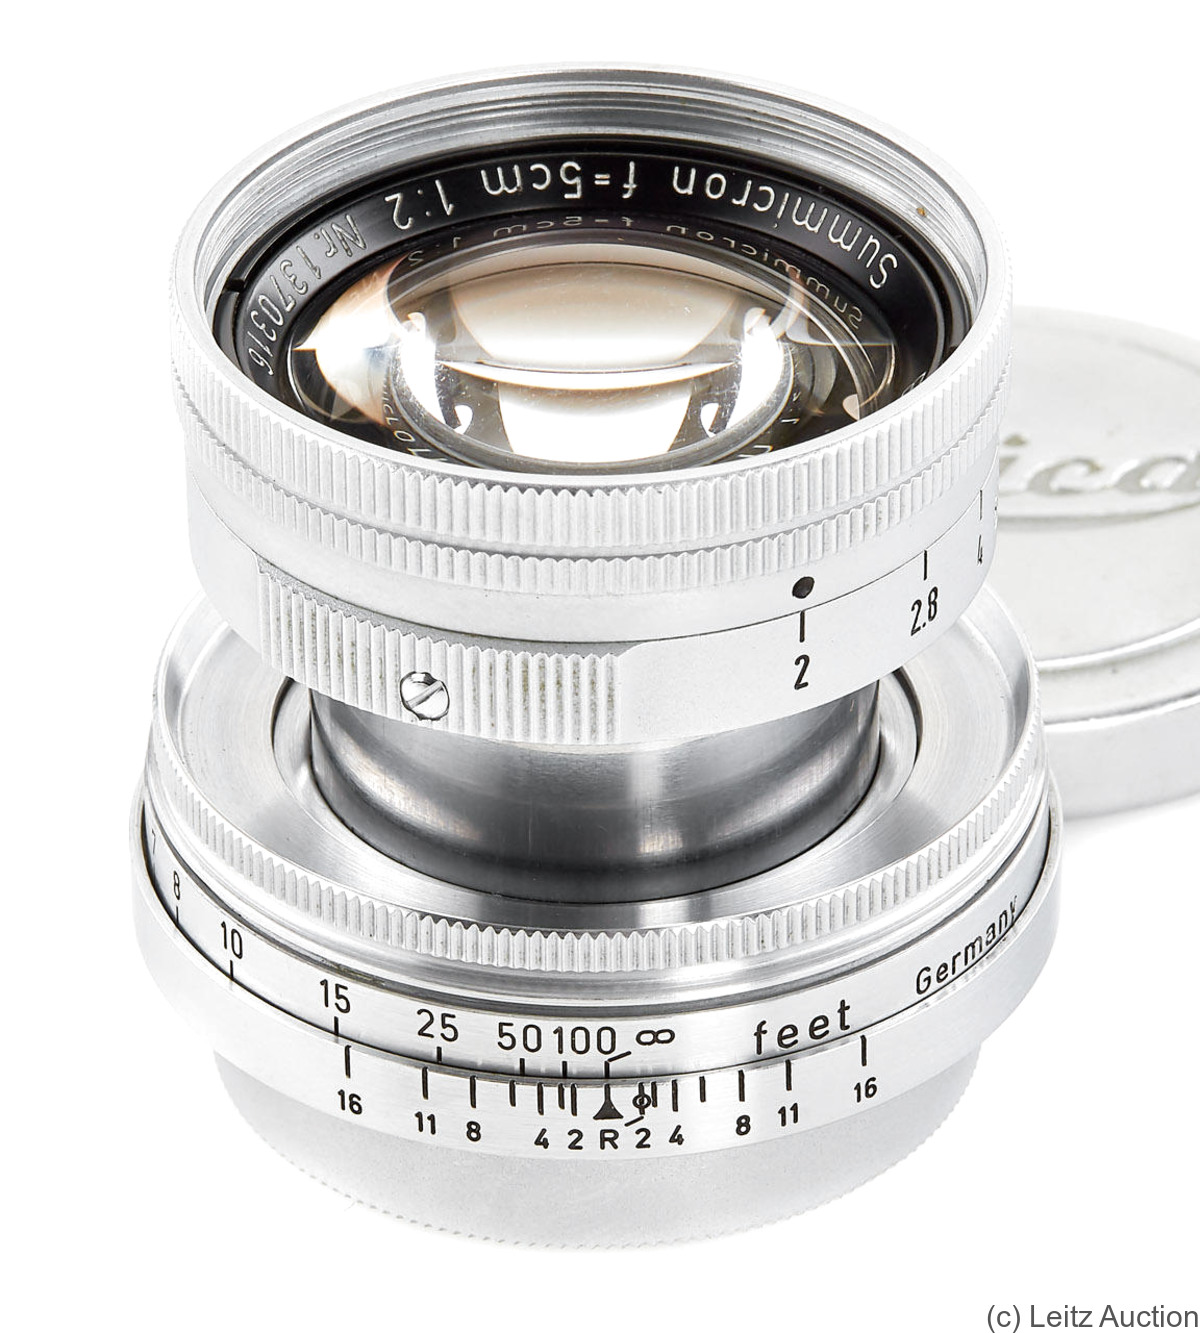 Leitz: 50mm (5cm) f2 Summicron (SM, collapsible) Lens Price Guide